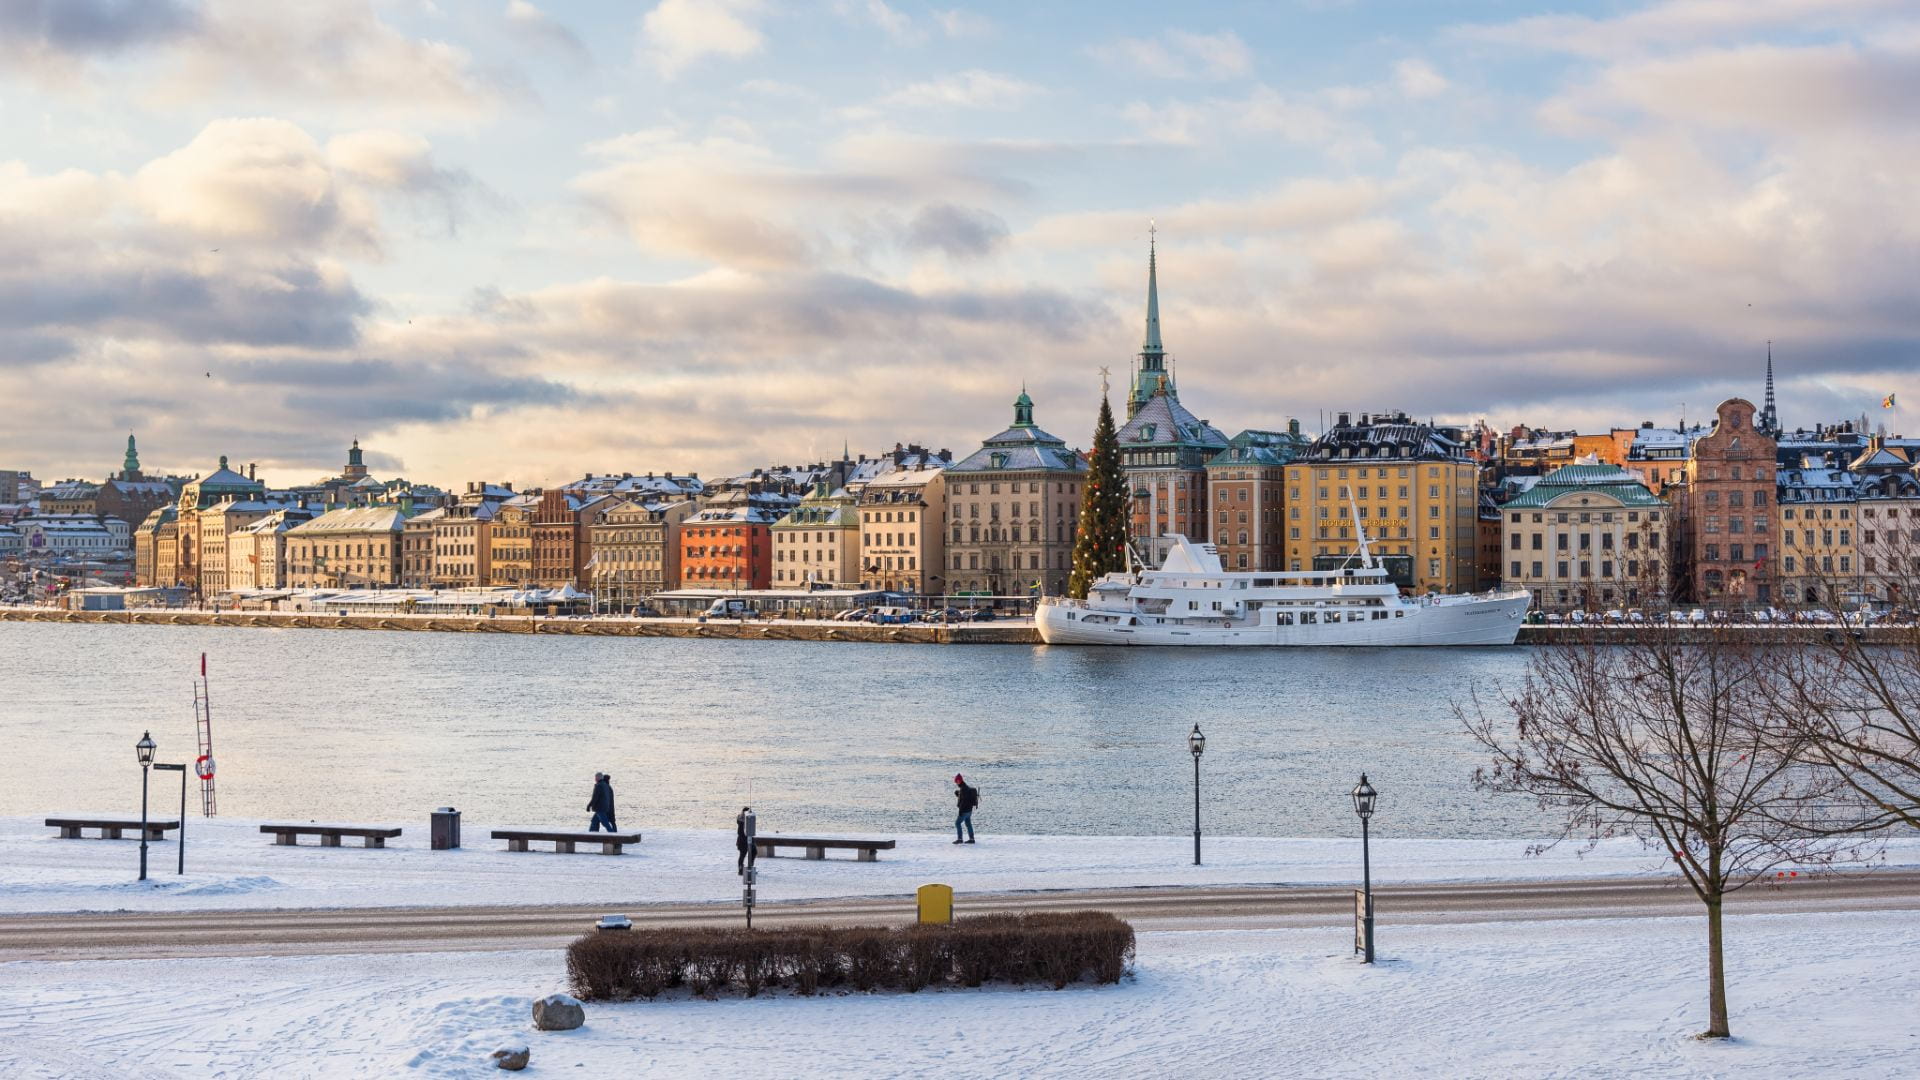 A view of Stockholm across the water in winter.